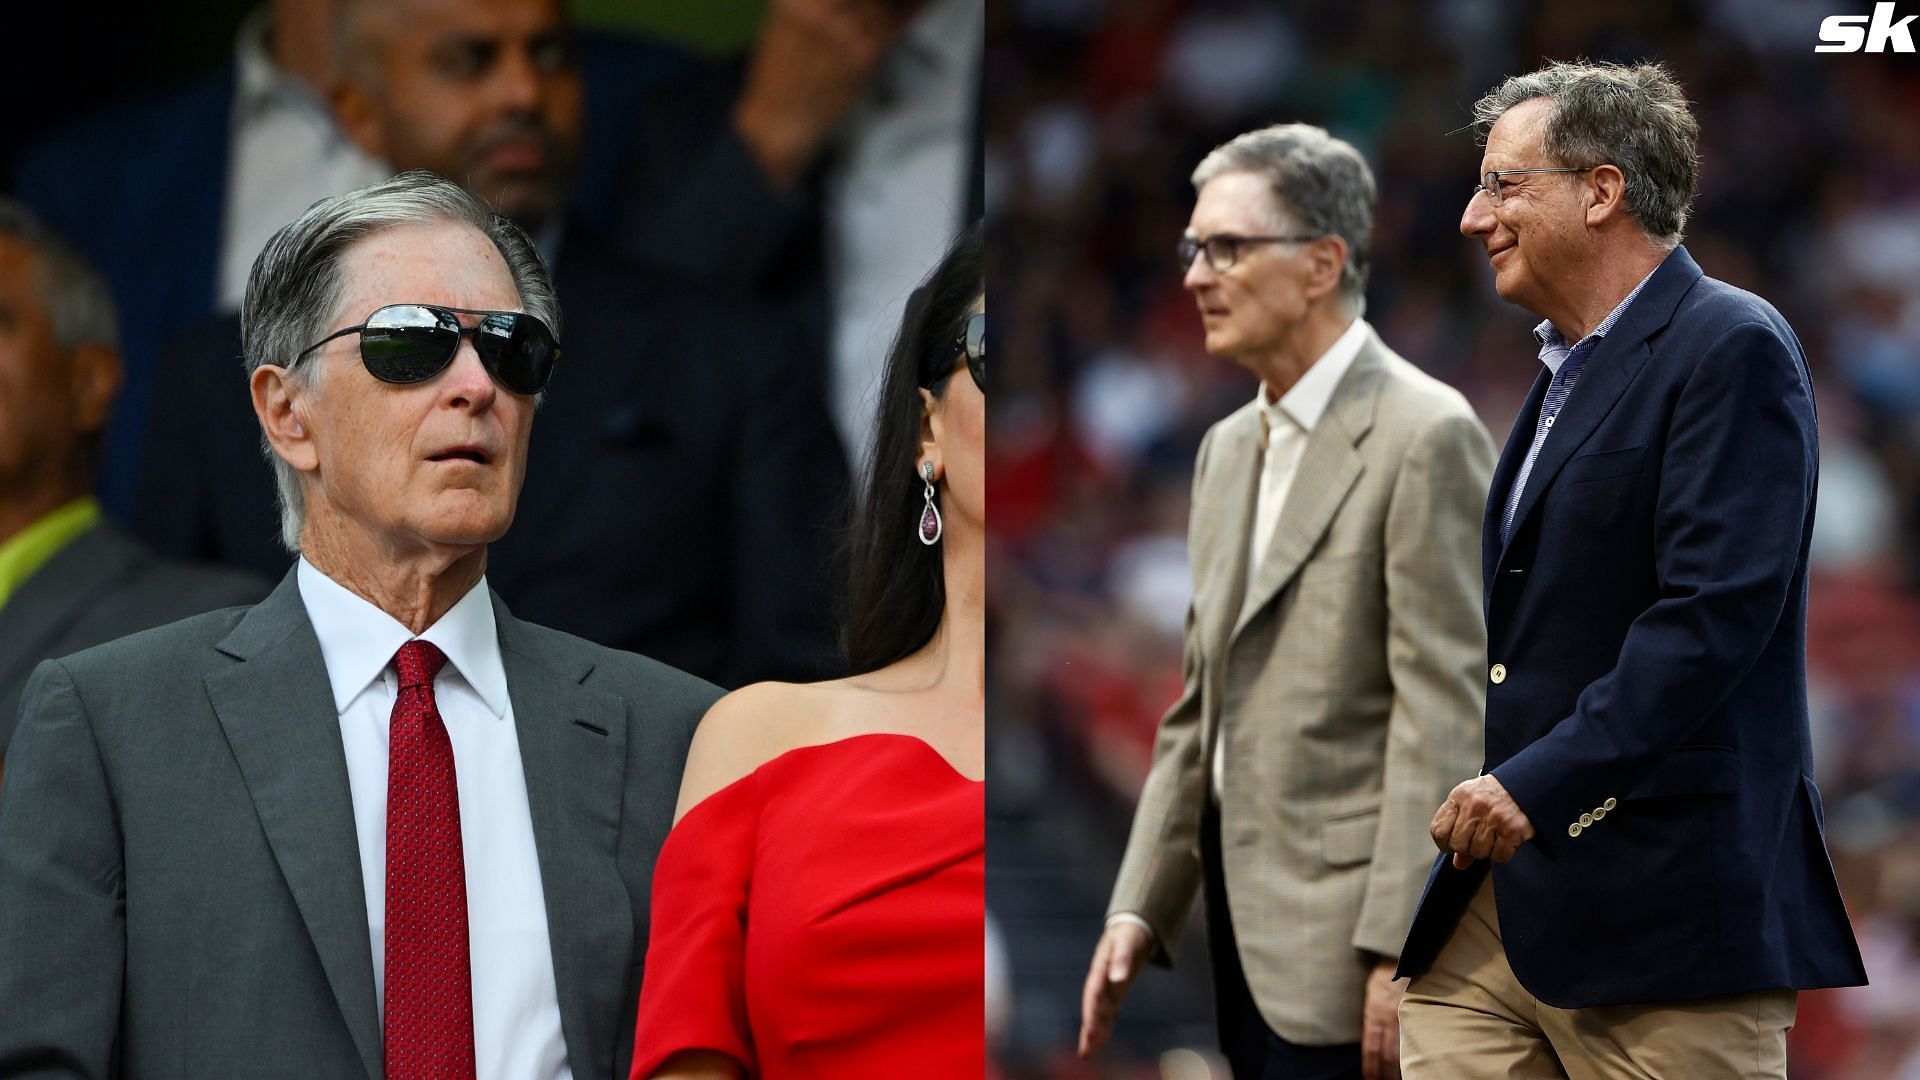 Chairman of the Boston Red Sox Tom Werner and principle owner John Henry walk on the field before the game between the Boston Red Sox and the New York Yankees at Fenway Park